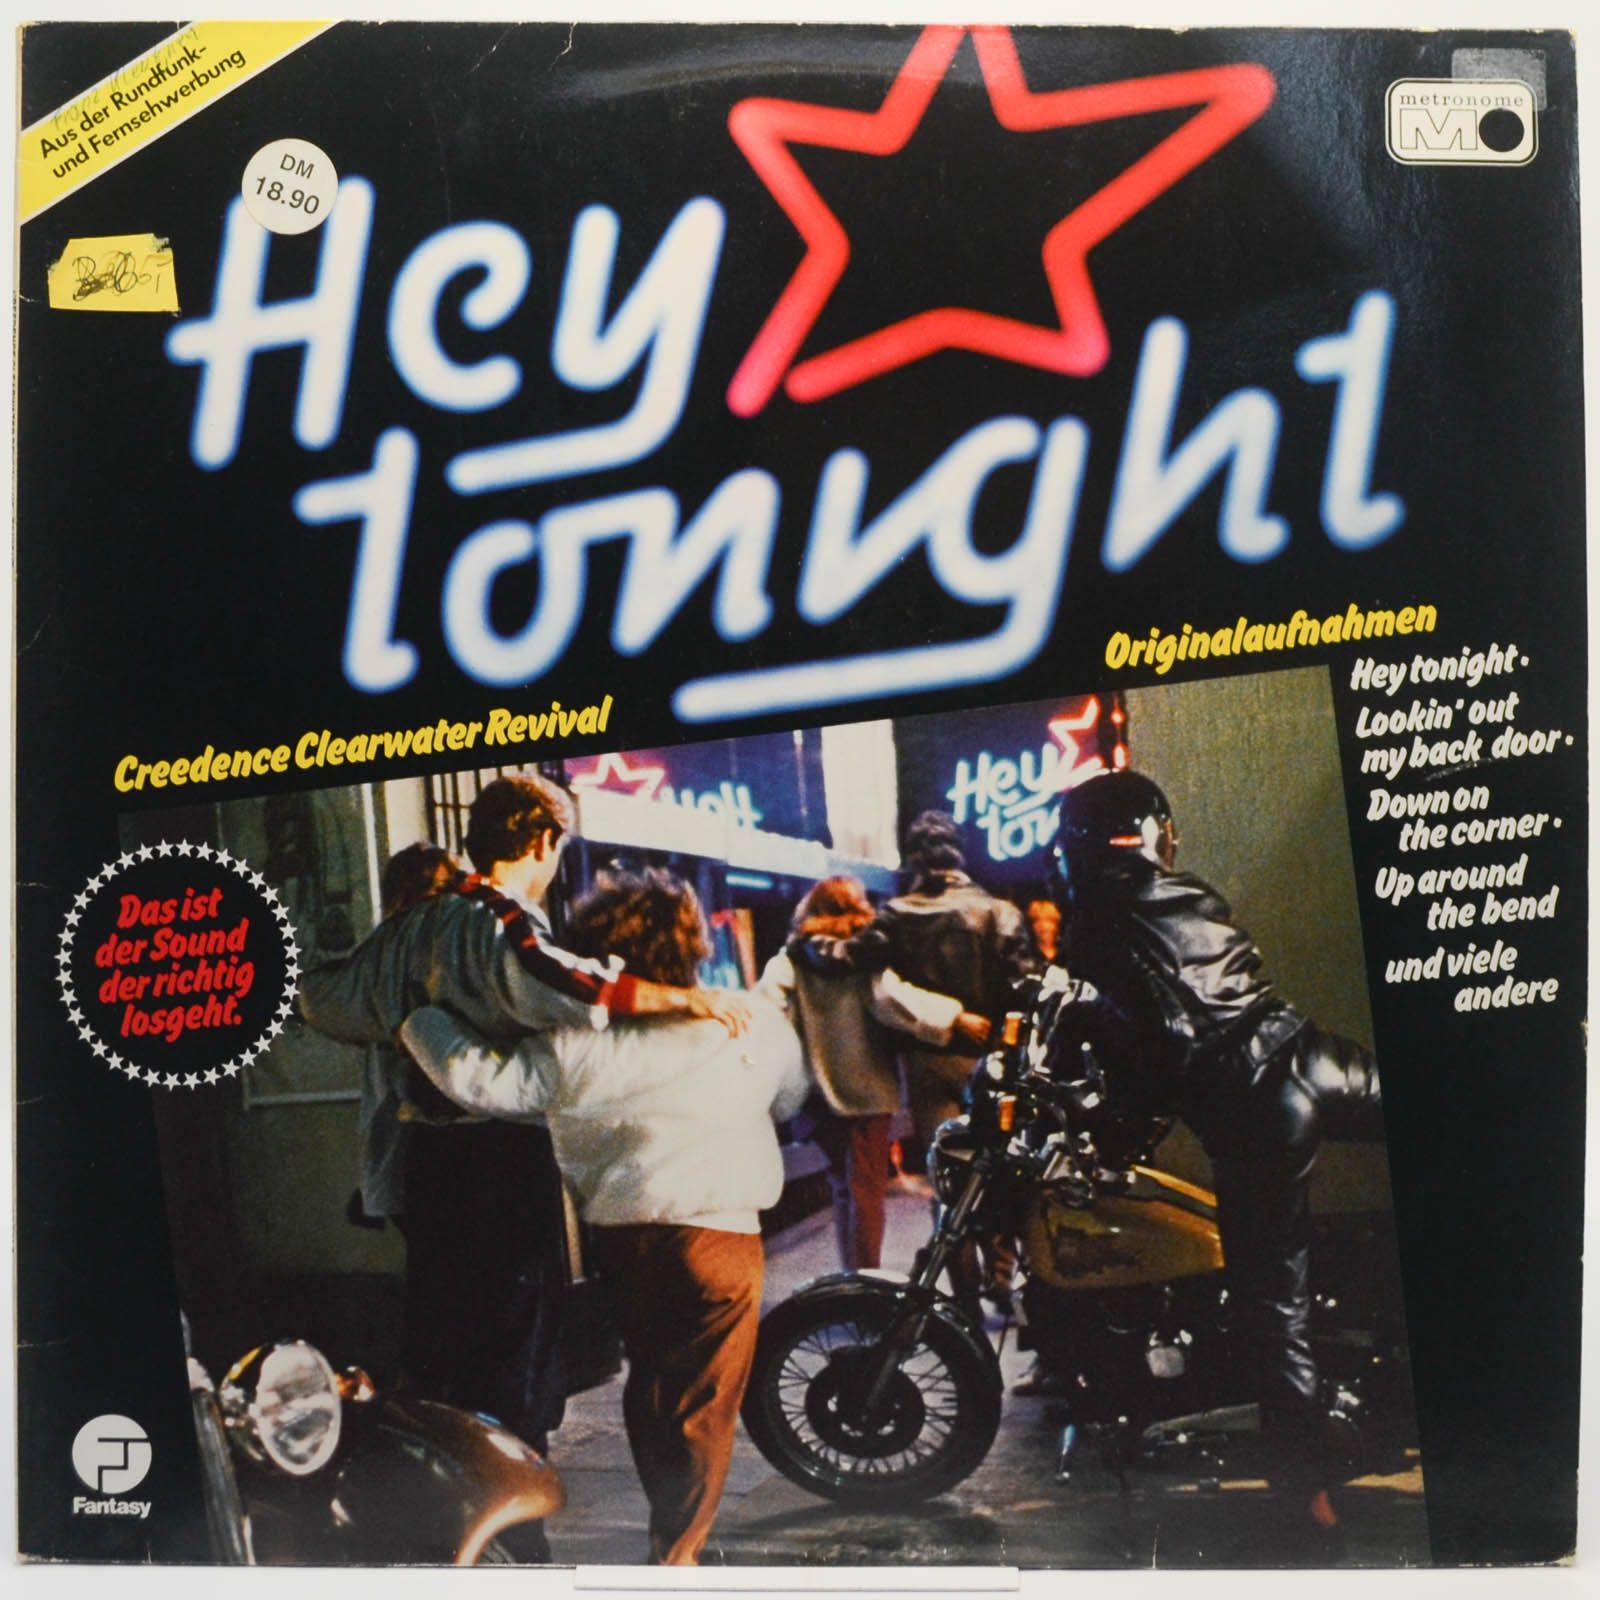 Creedence Clearwater Revival — Hey Tonight, 1981